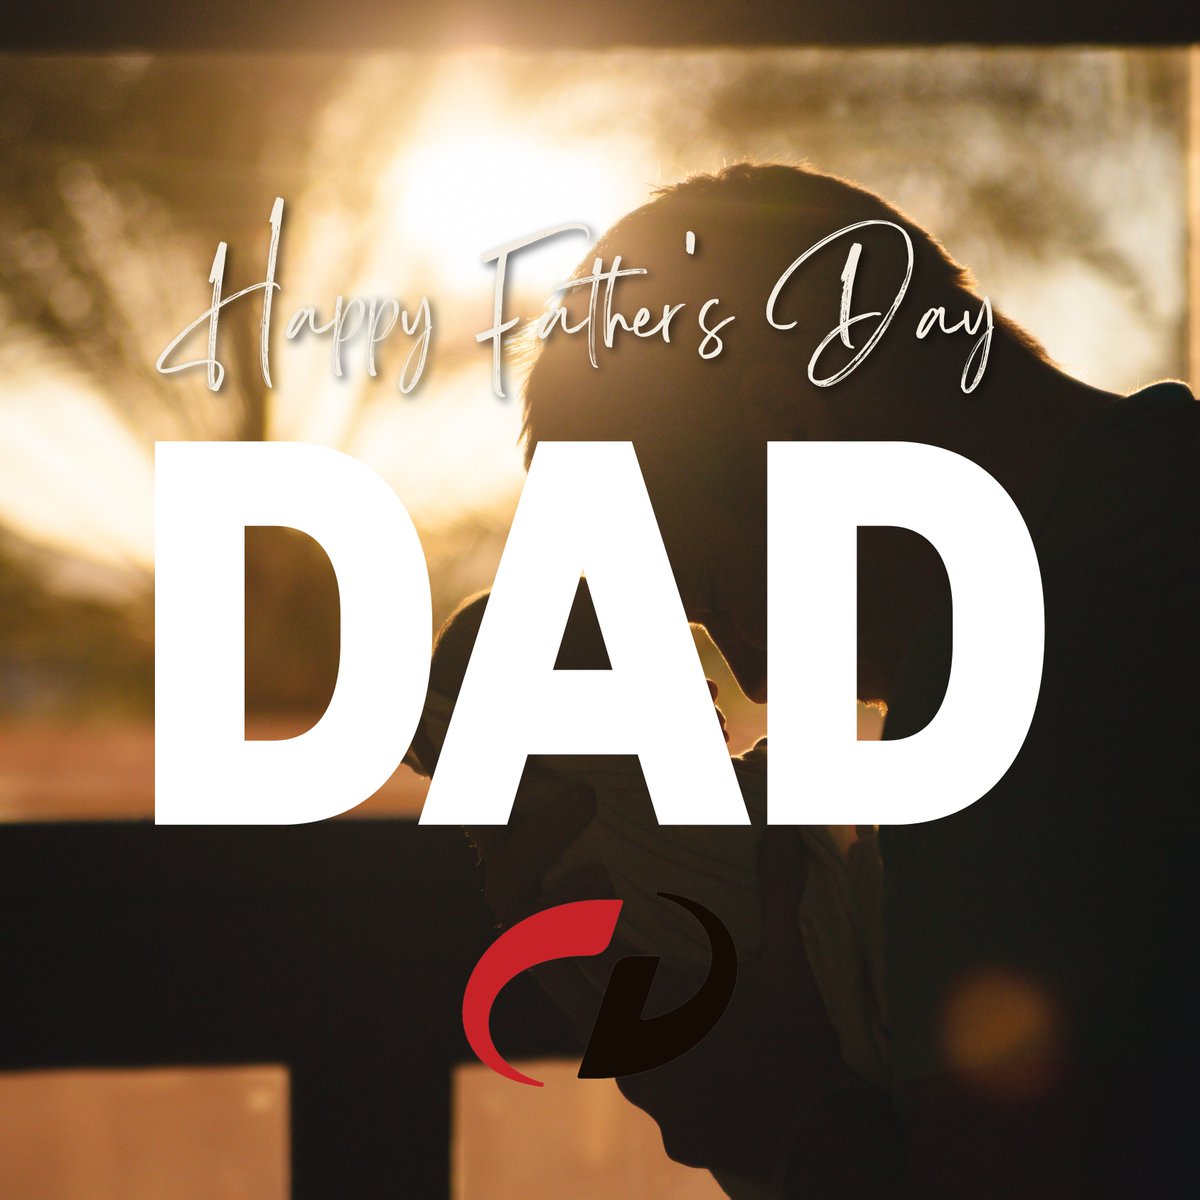 Happy Father’s Day to all the dads, father figures, and loved ones who are doing their best and just trying to be there for all those precious moments!

#CustomDesignbyECHO #FathersDay #FathersDay2023 #HappyFathersDay